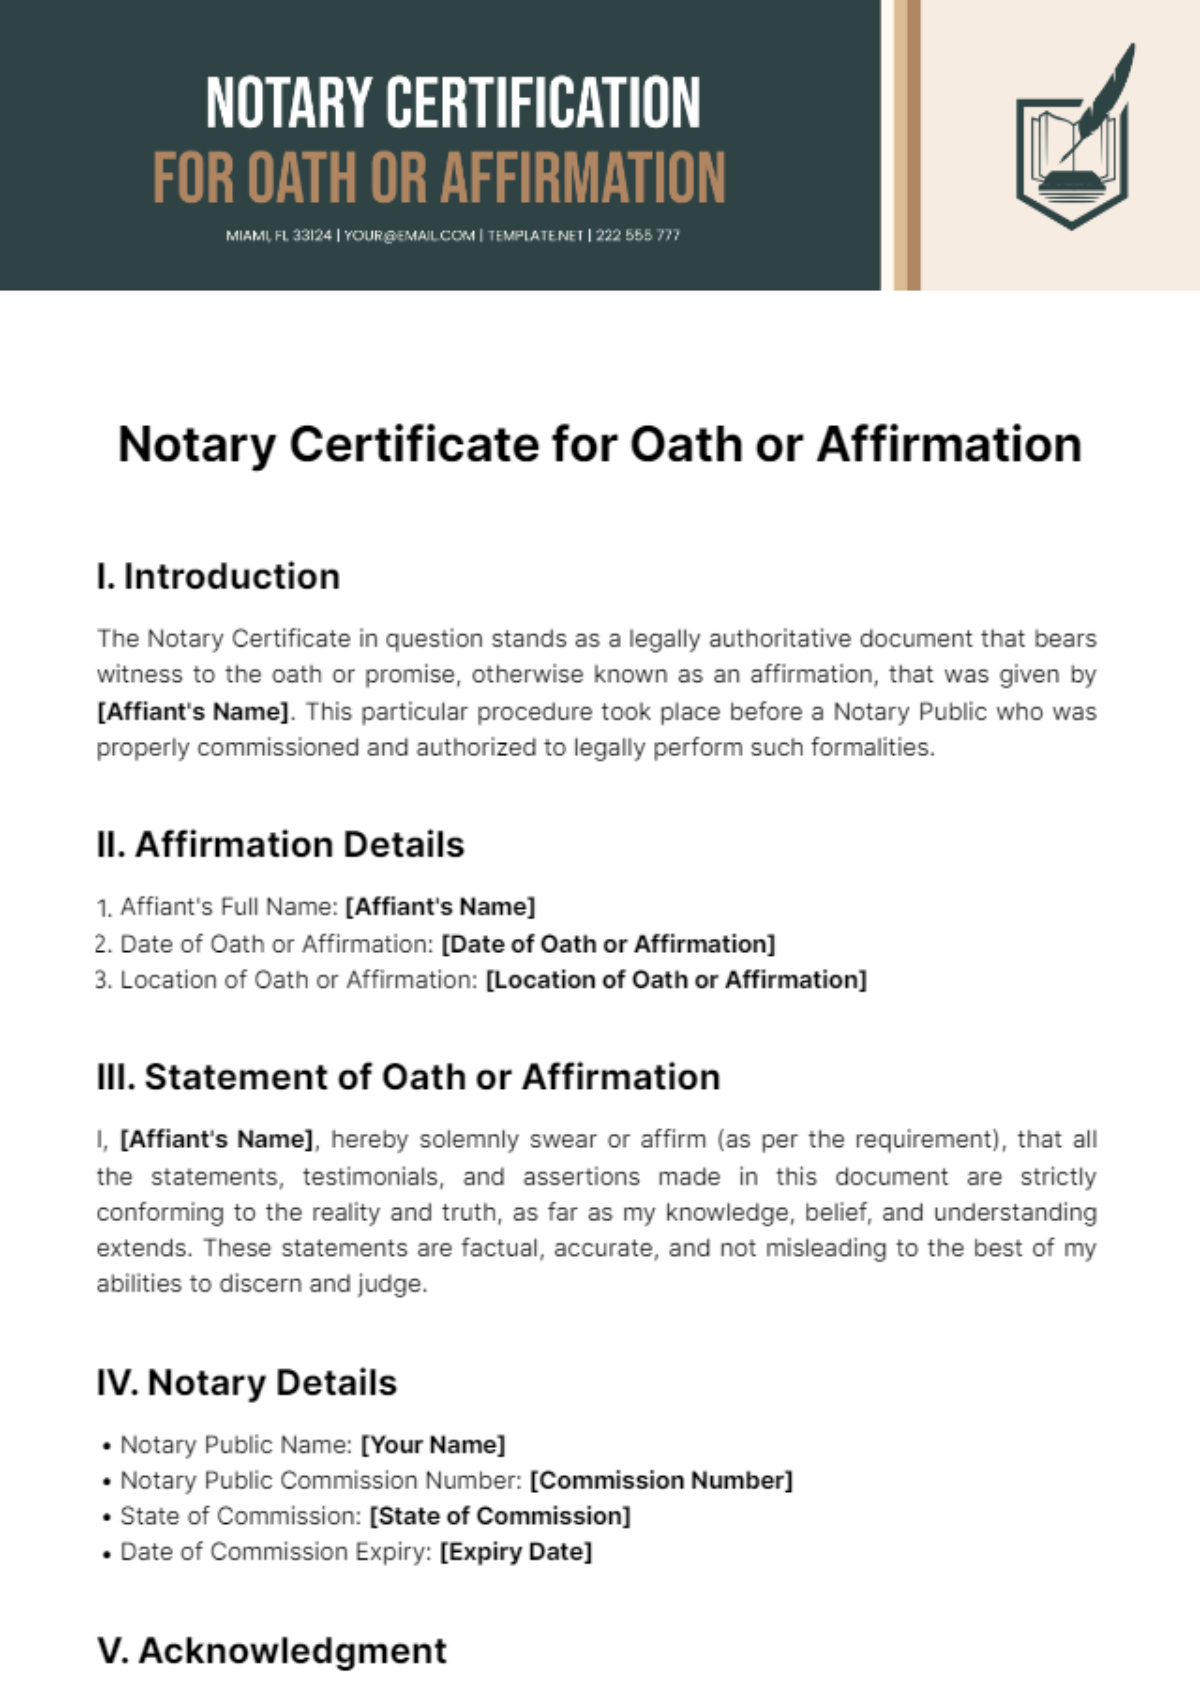 Free Notary Certificate For Oath Or Affirmation Template